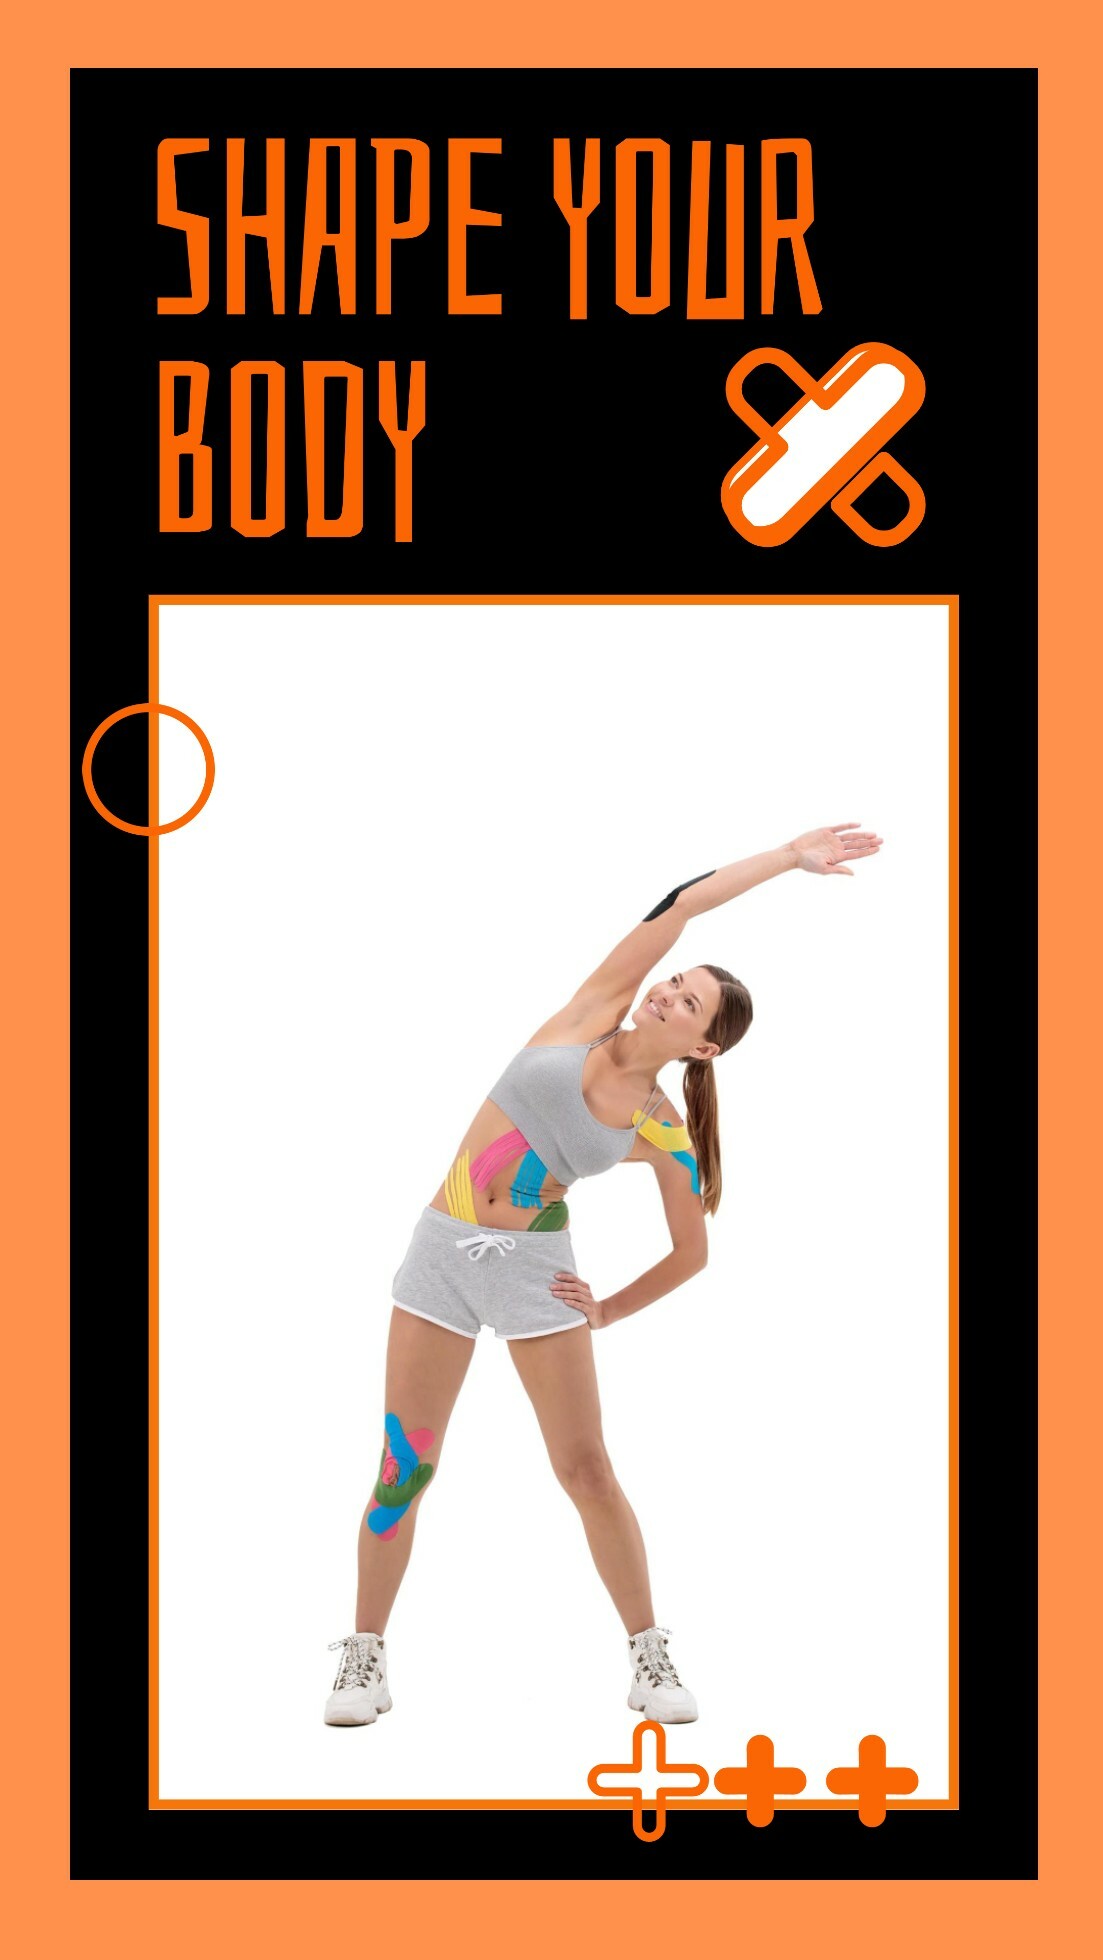 Shape your body template